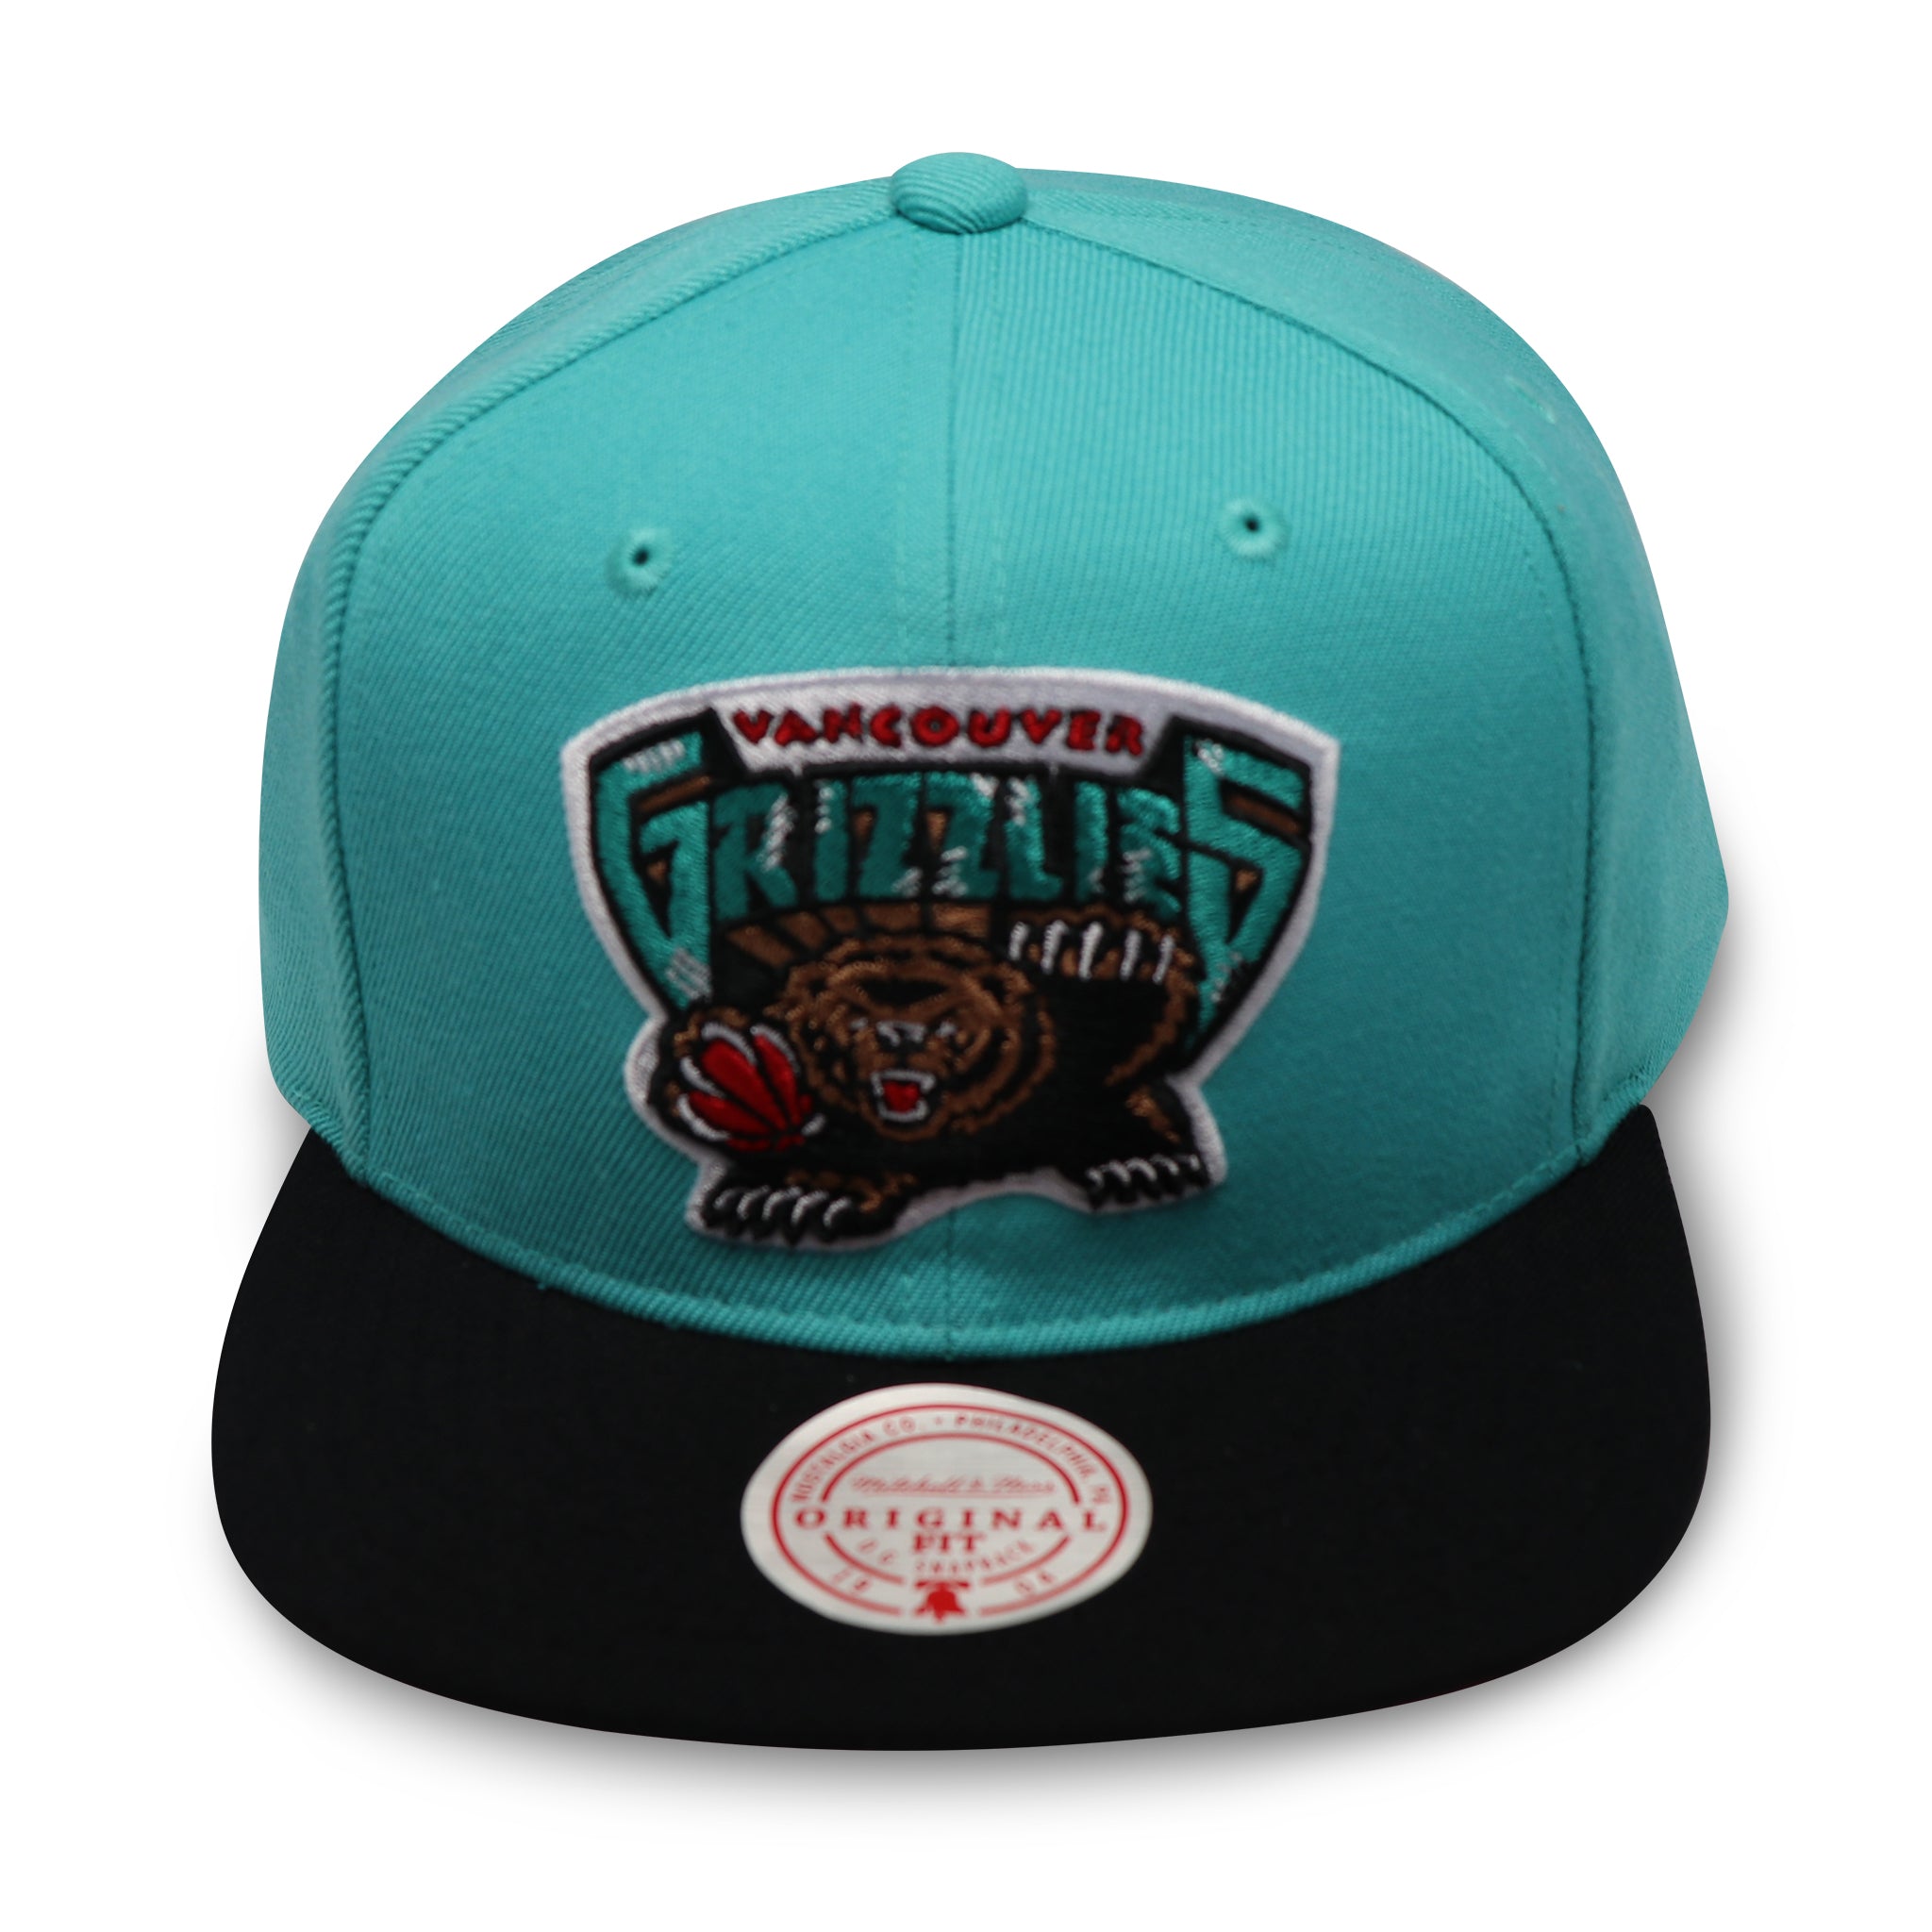 MITCHELL & NESS VANCOUVER GRIZZLIES (2-TONE) SNAPBACK